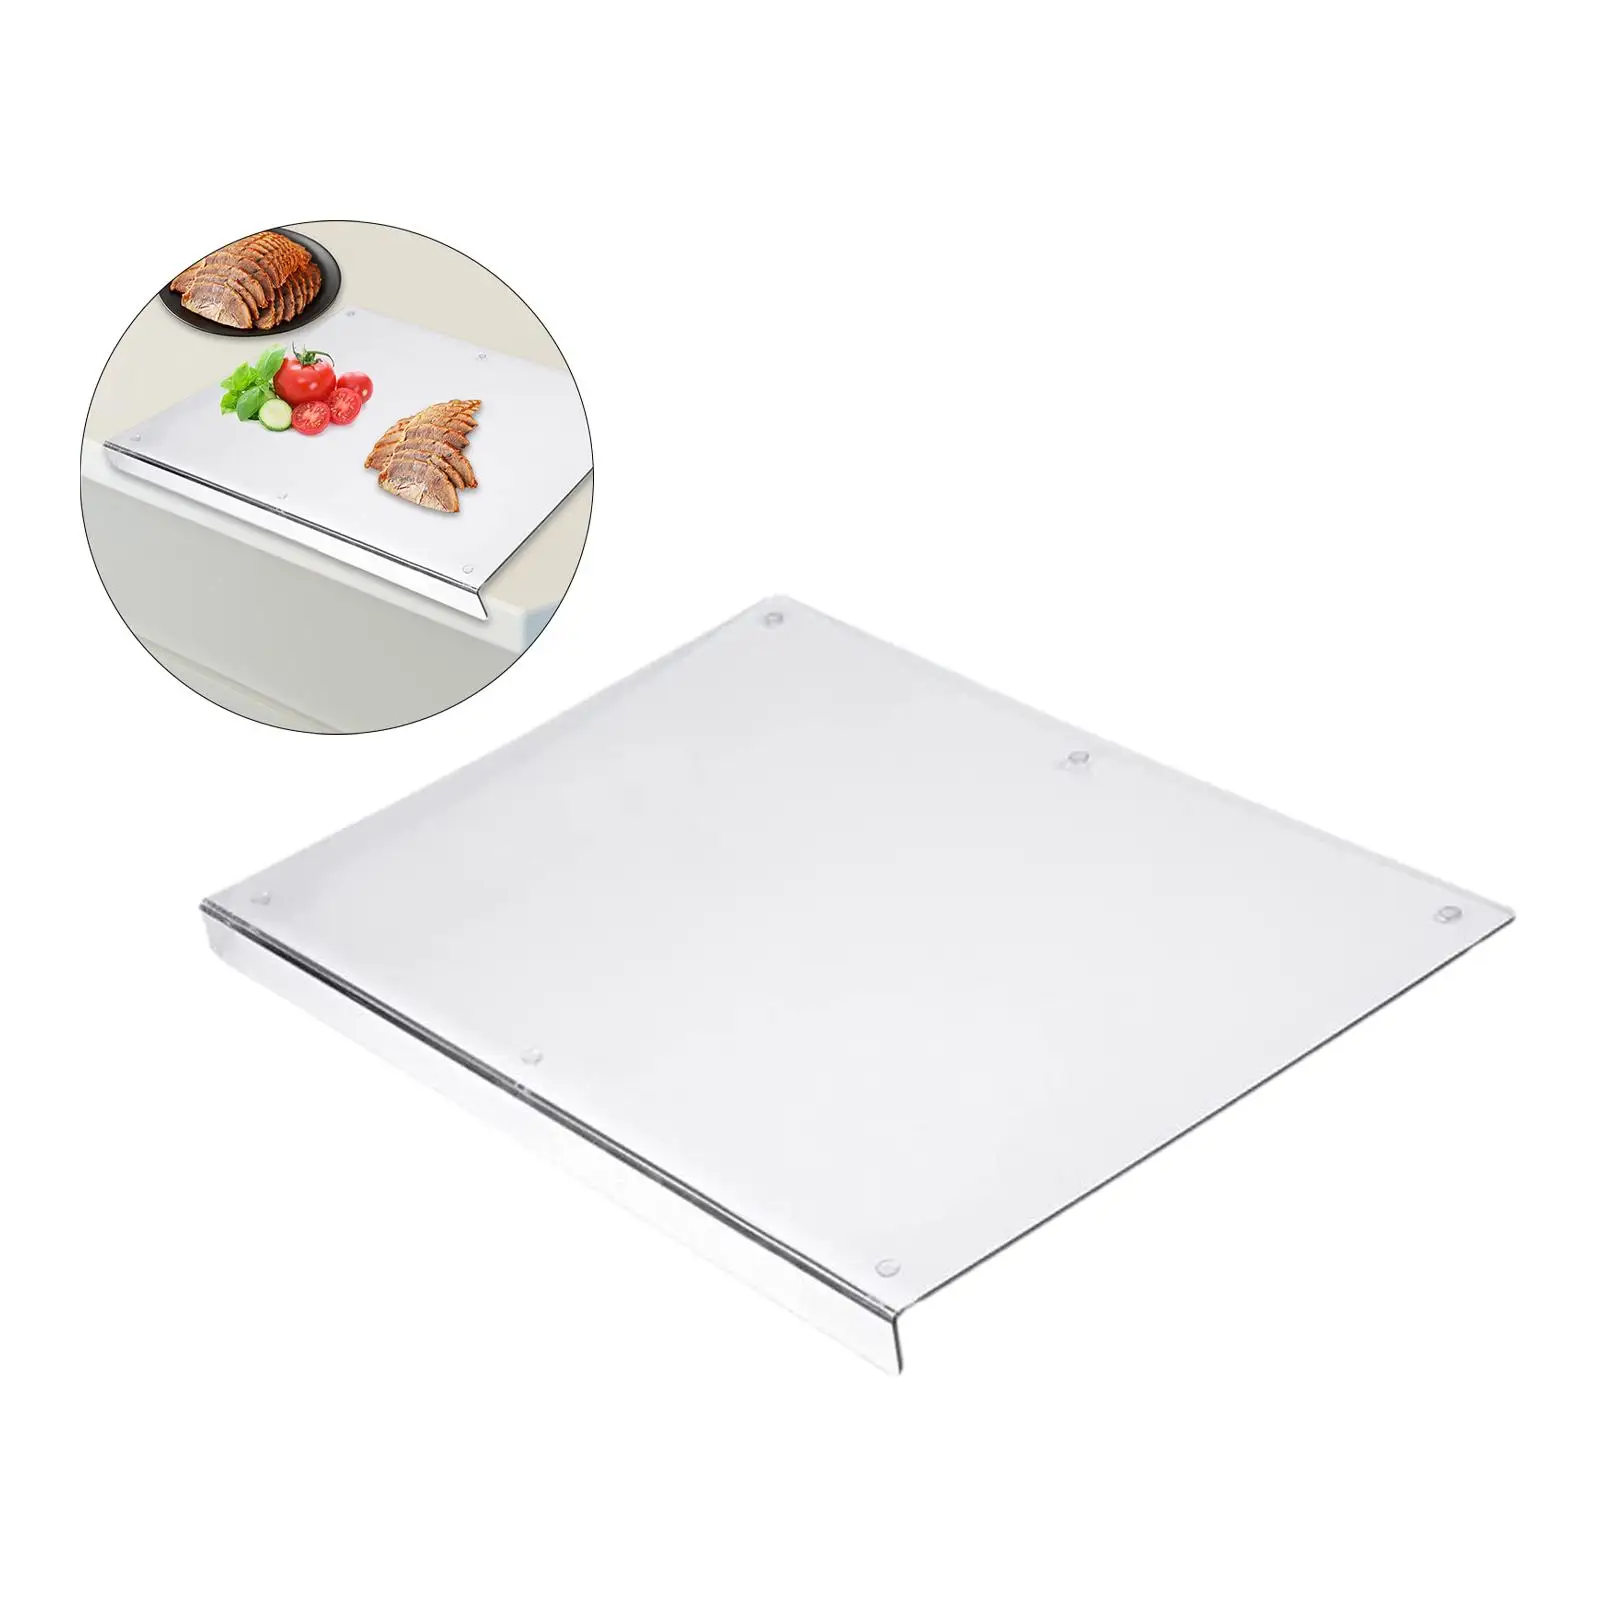 Cutting Board, Vegetable Chopping Board, Easy to Clean Acrylic Cutting Board, Chopping Board, for Fruit